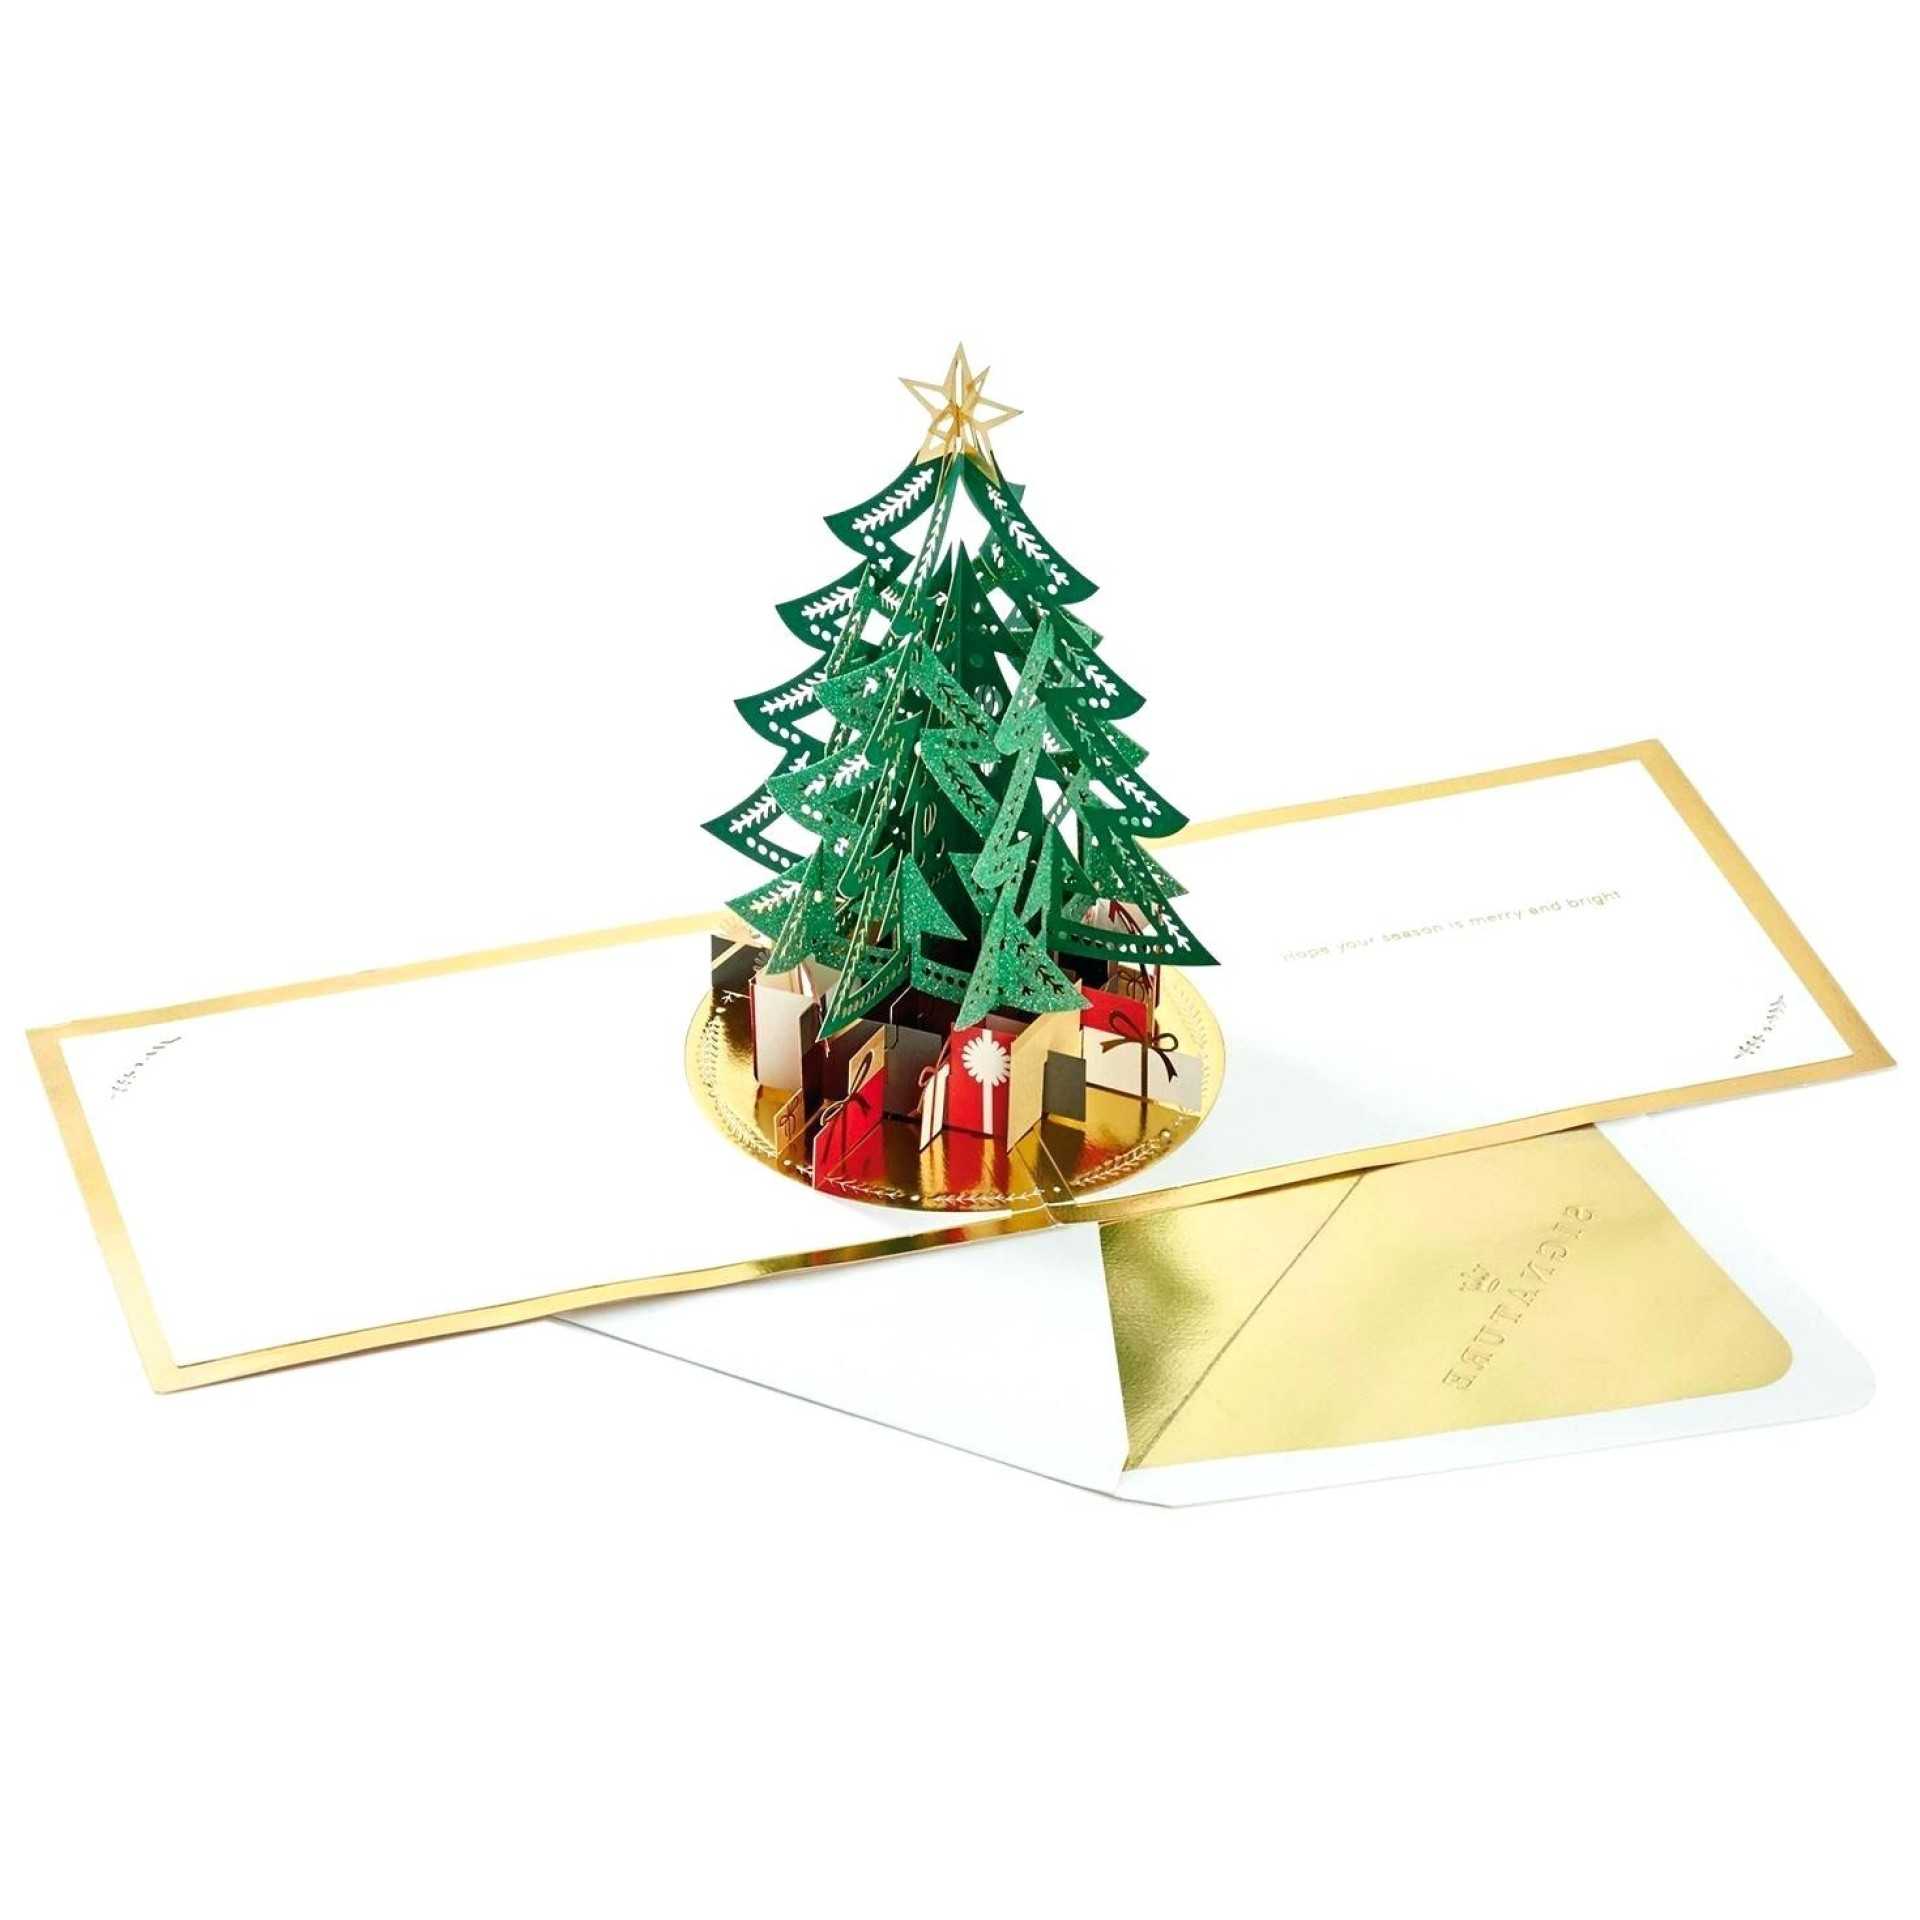 027 84614 10951579724 9338E5D5 Dca2 4412 9F59 413344C84Caf Intended For 3D Christmas Tree Card Template